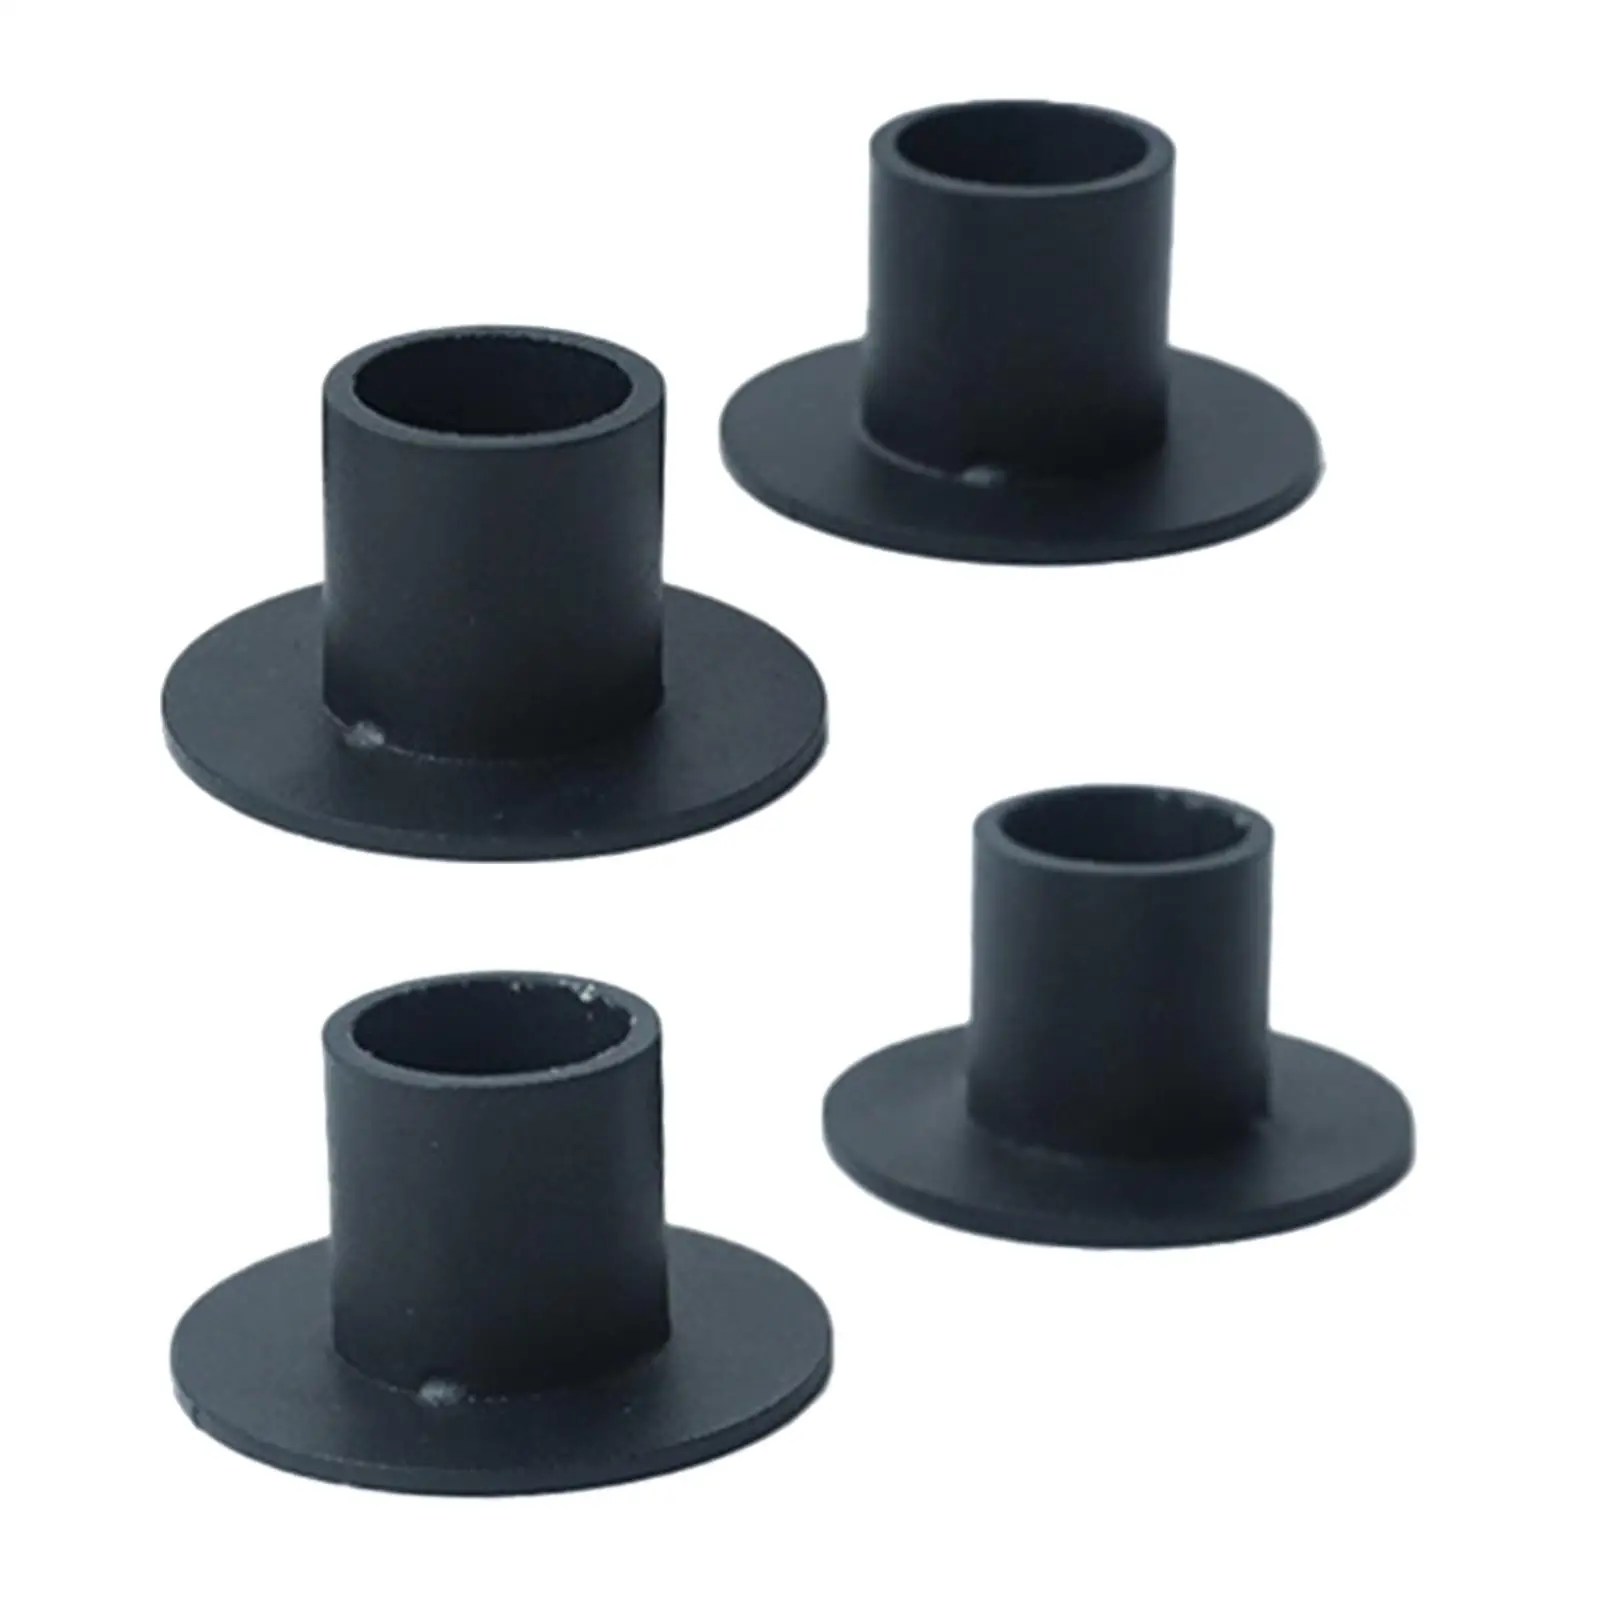 4 Pieces Pillar Candle Holder Candle Stand Vintage Style Candlestick Holder for Dining Table Party Bedroom Home Decors